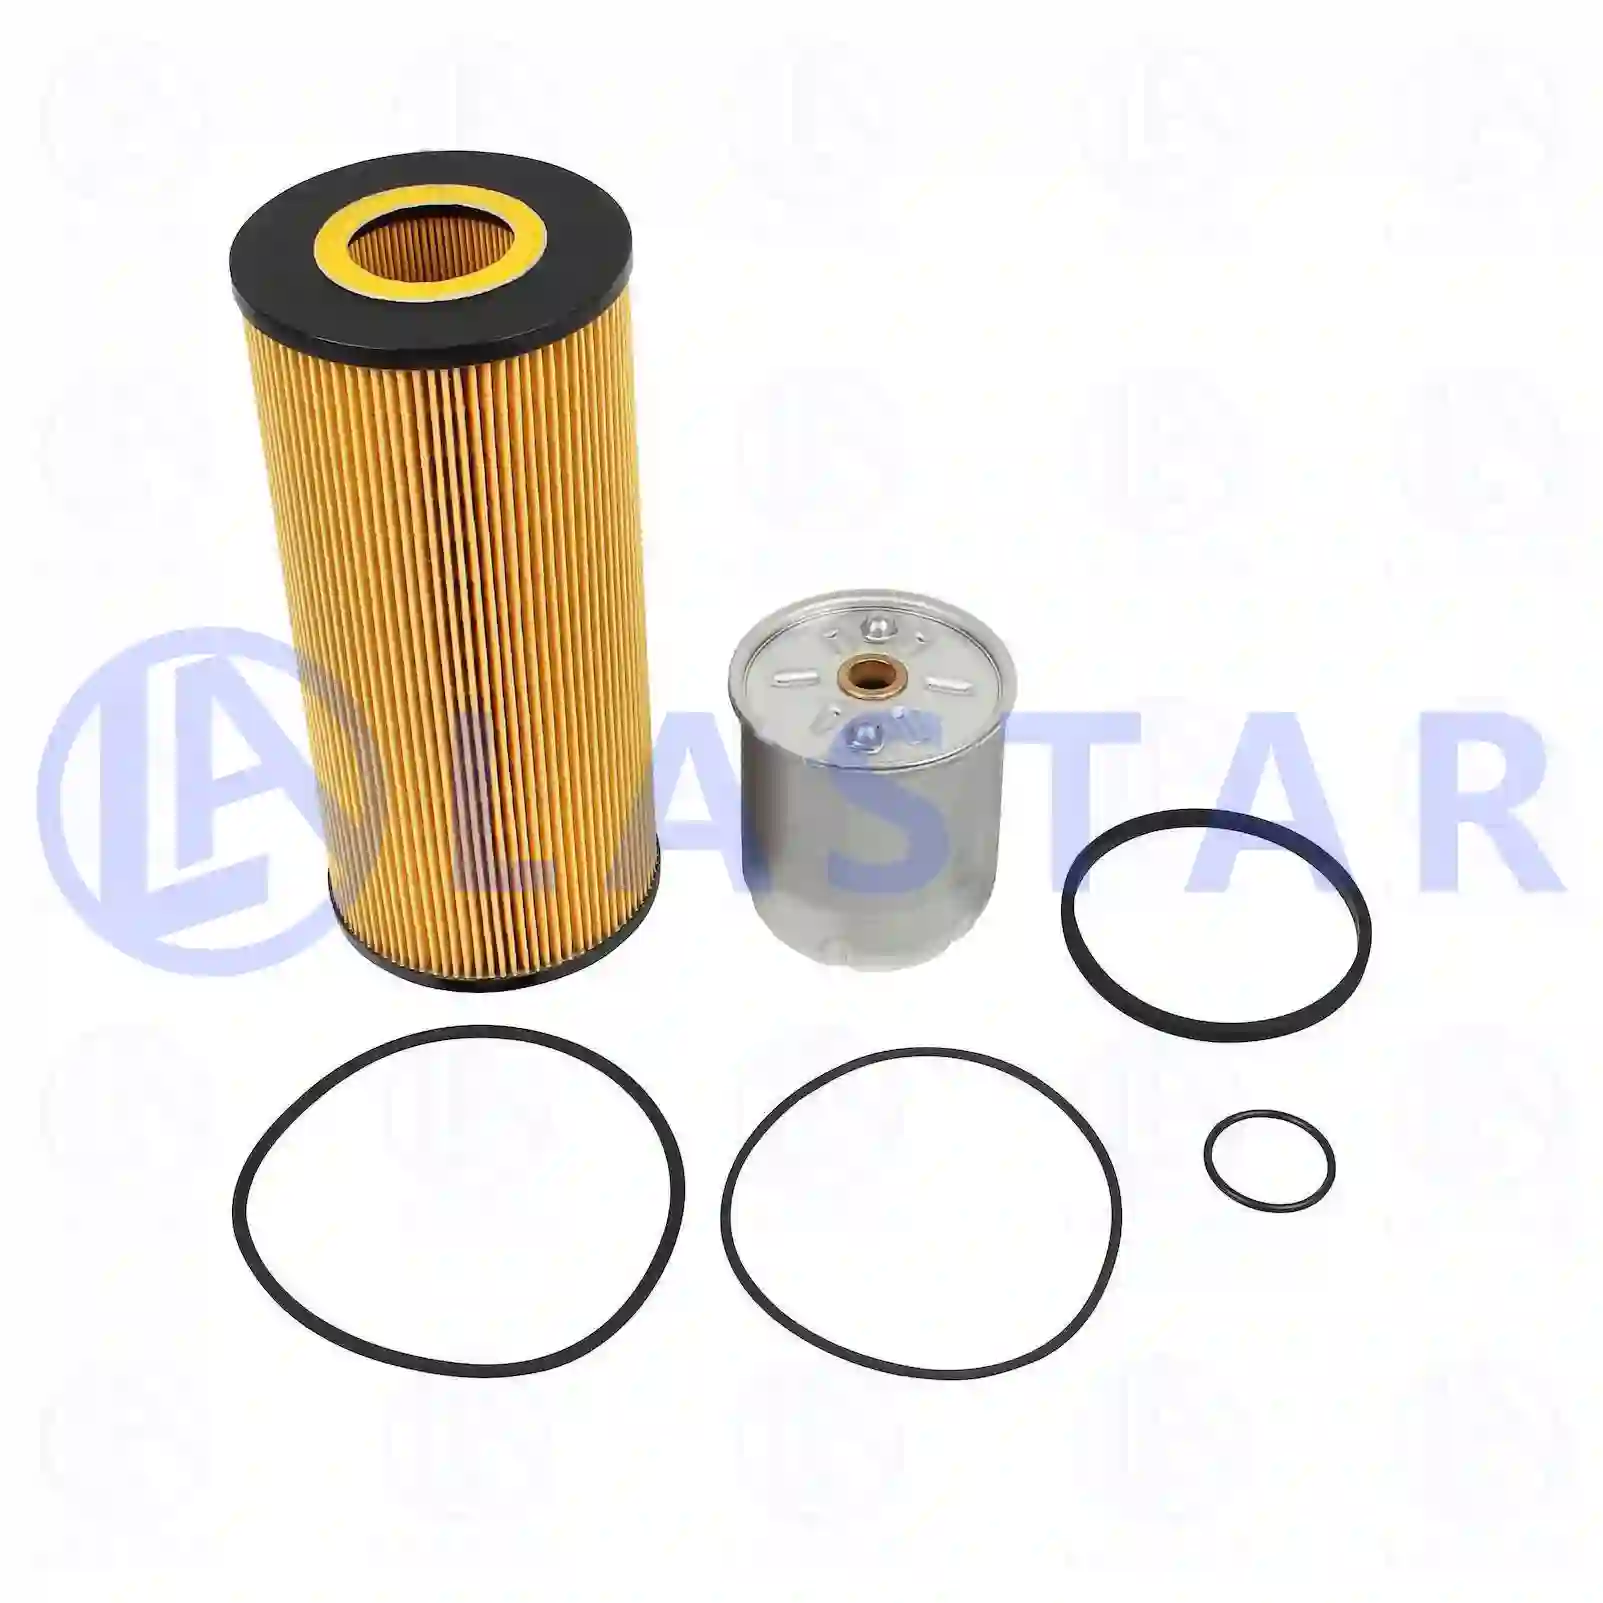  Oil filter kit, for biodiesel-engines || Lastar Spare Part | Truck Spare Parts, Auotomotive Spare Parts